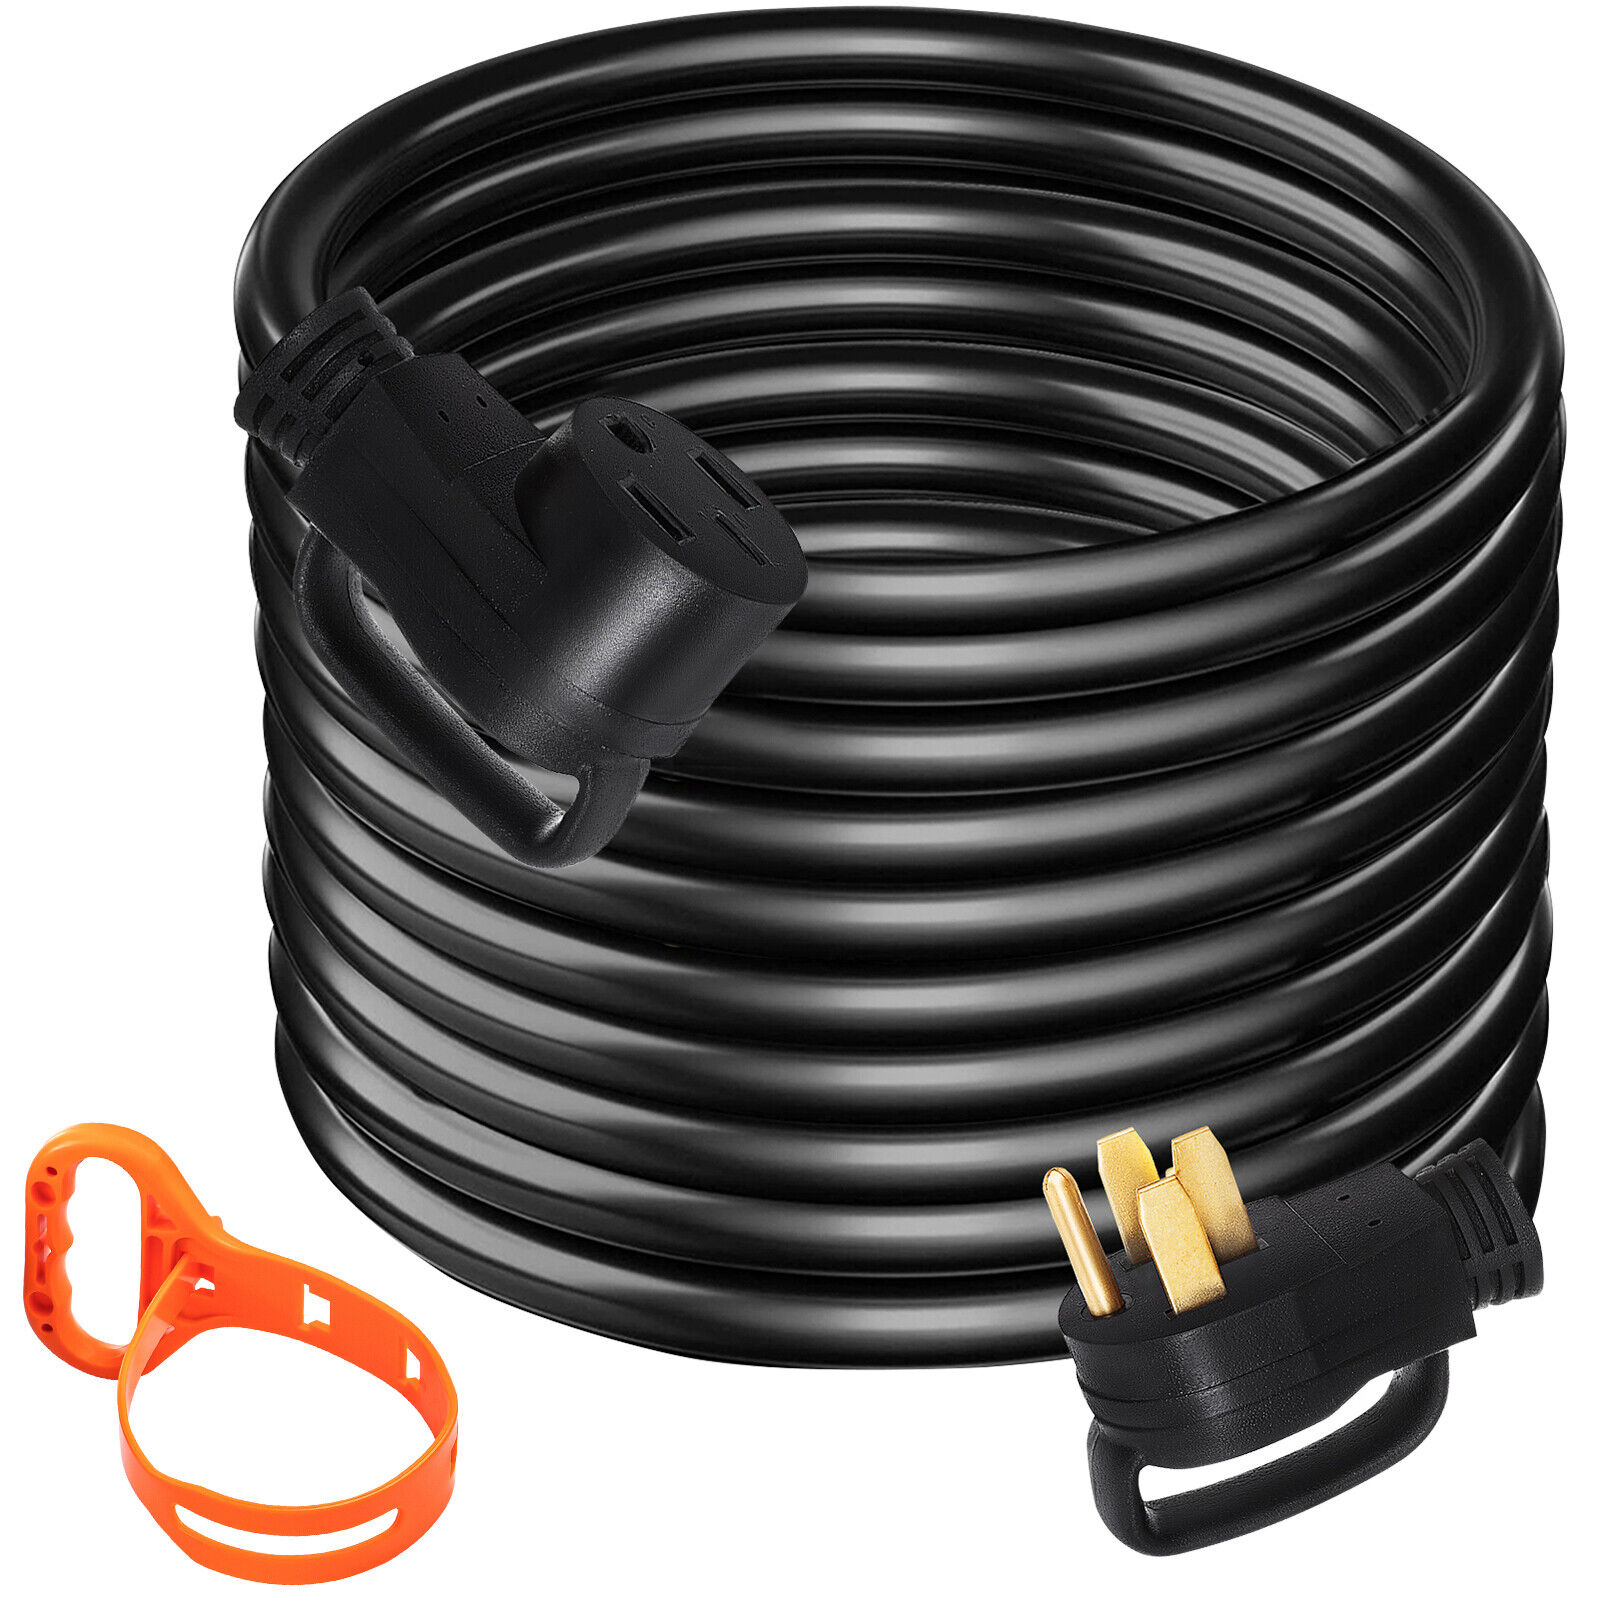 VEVOR 50A 50ft RV Extension Cord Rain-proof Cable for Trailer Motorhome Camper